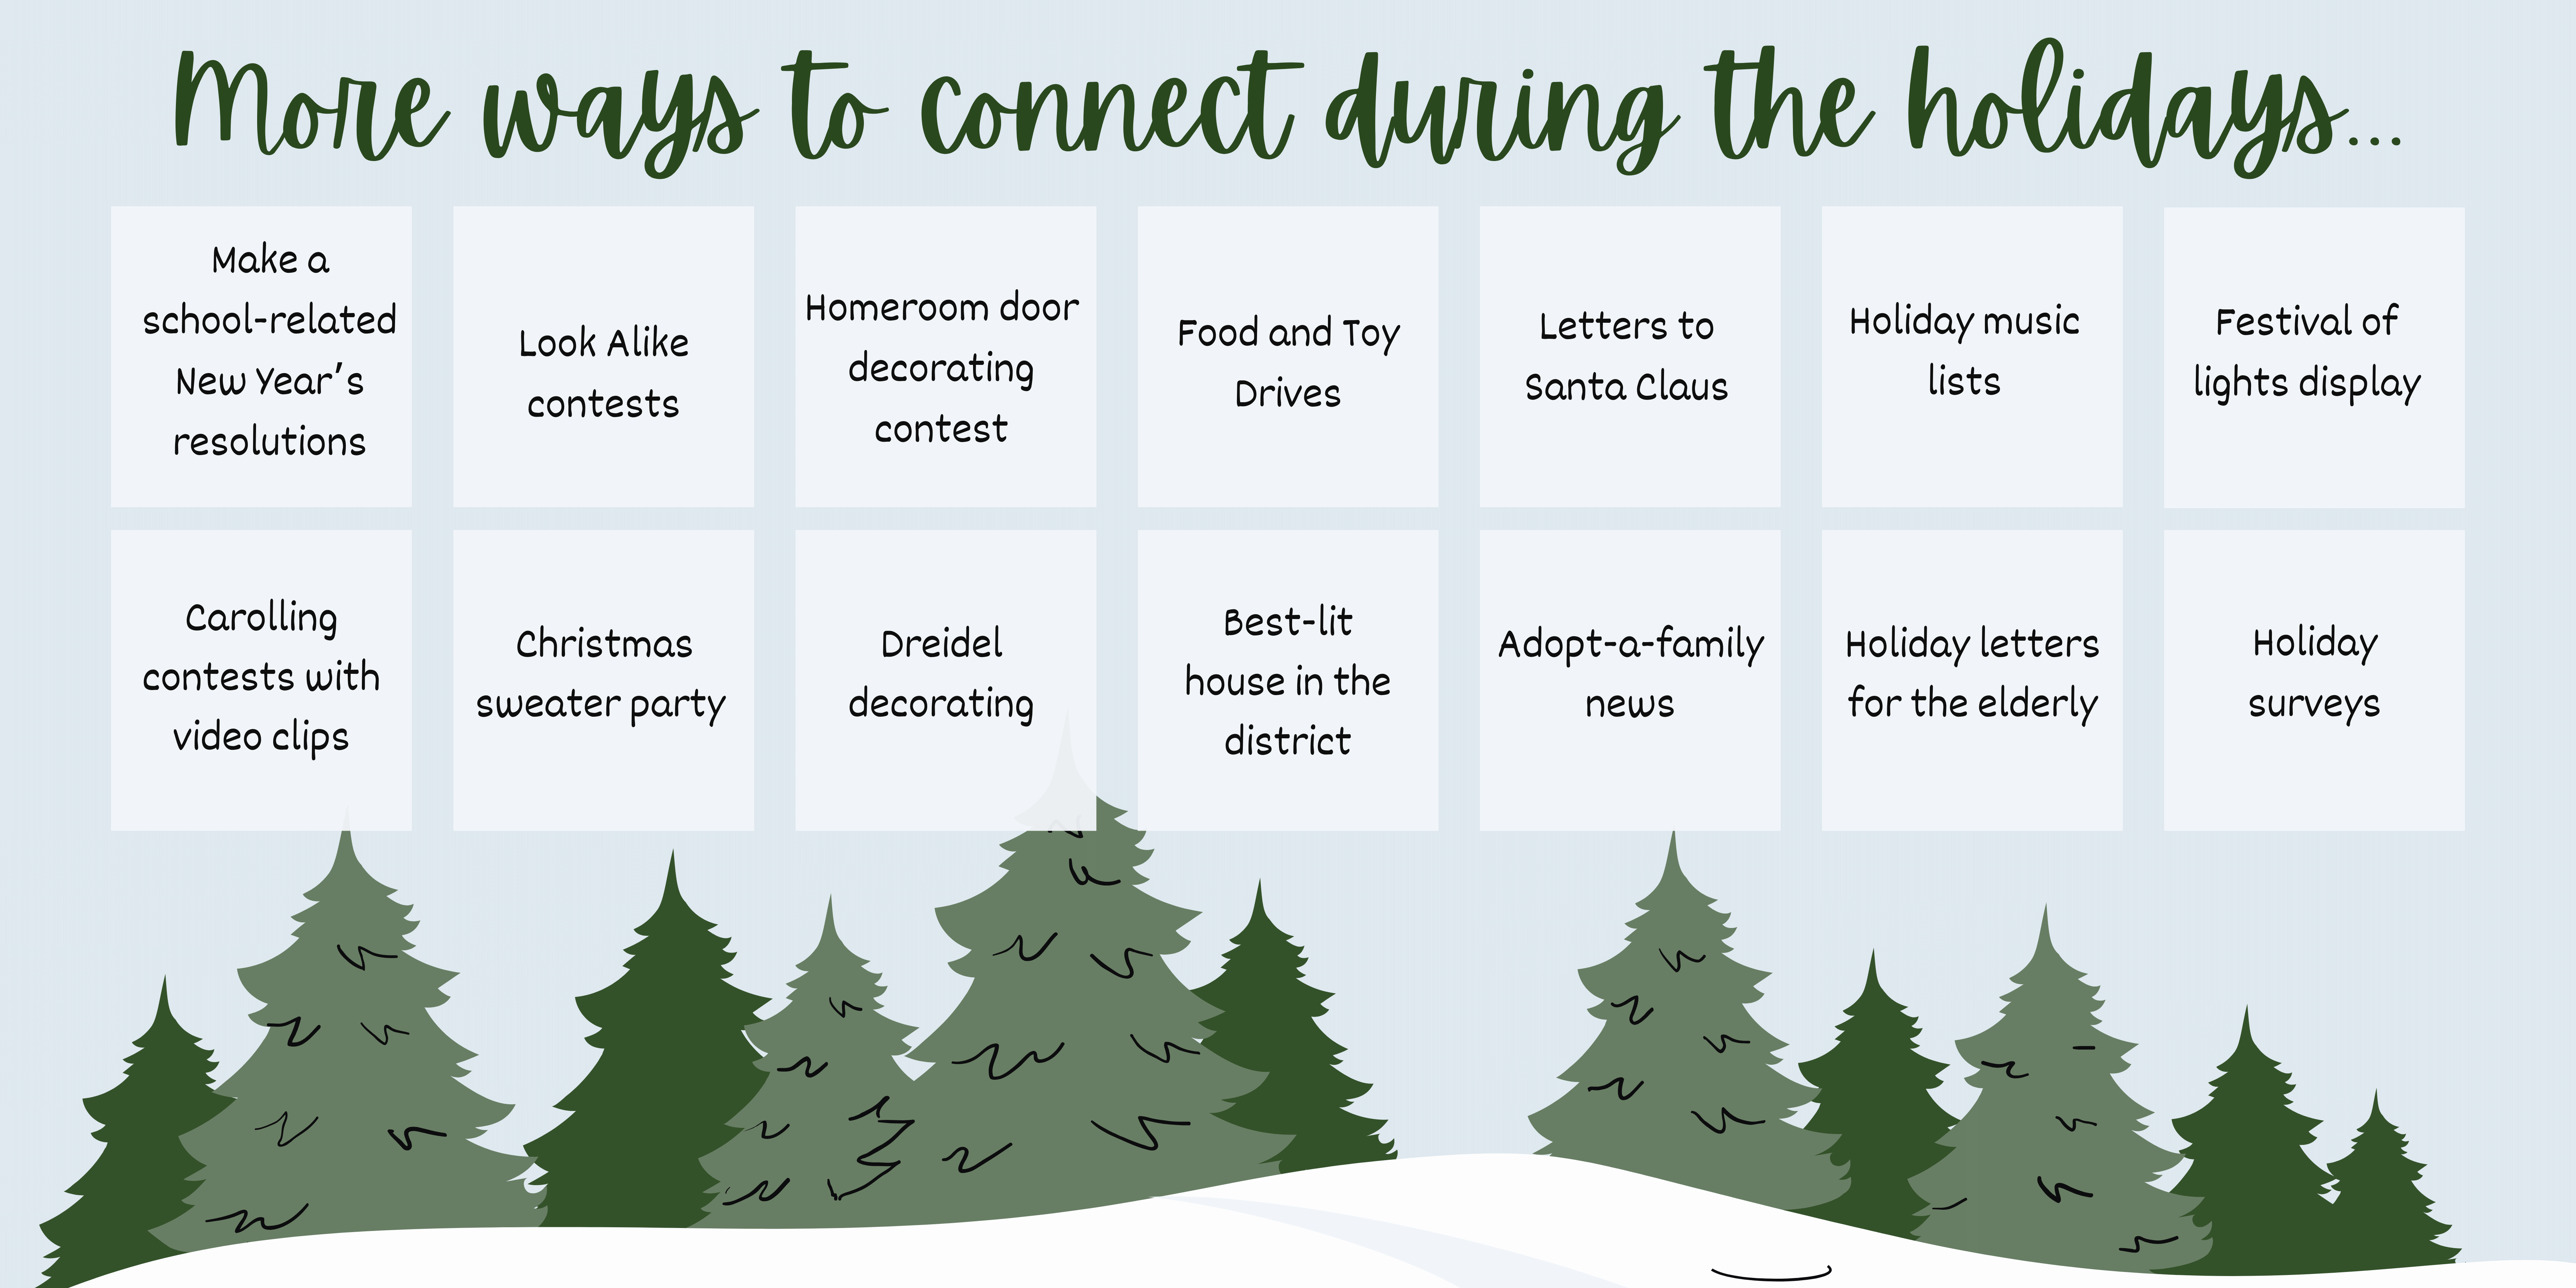 More ways to connect during the holidays...